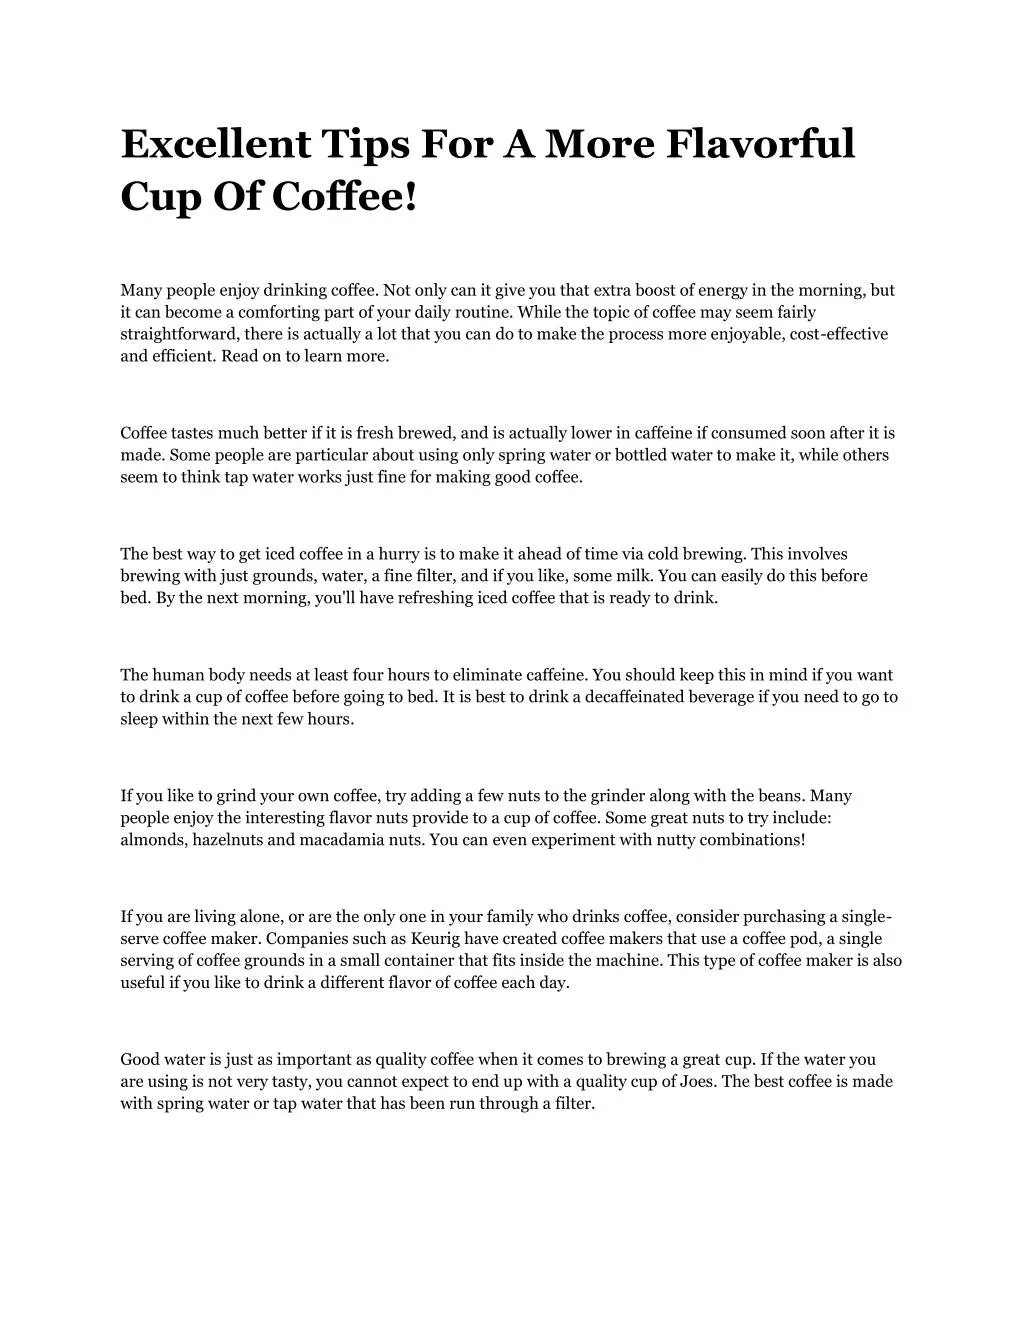 excellent tips for a more flavorful cup of coffee